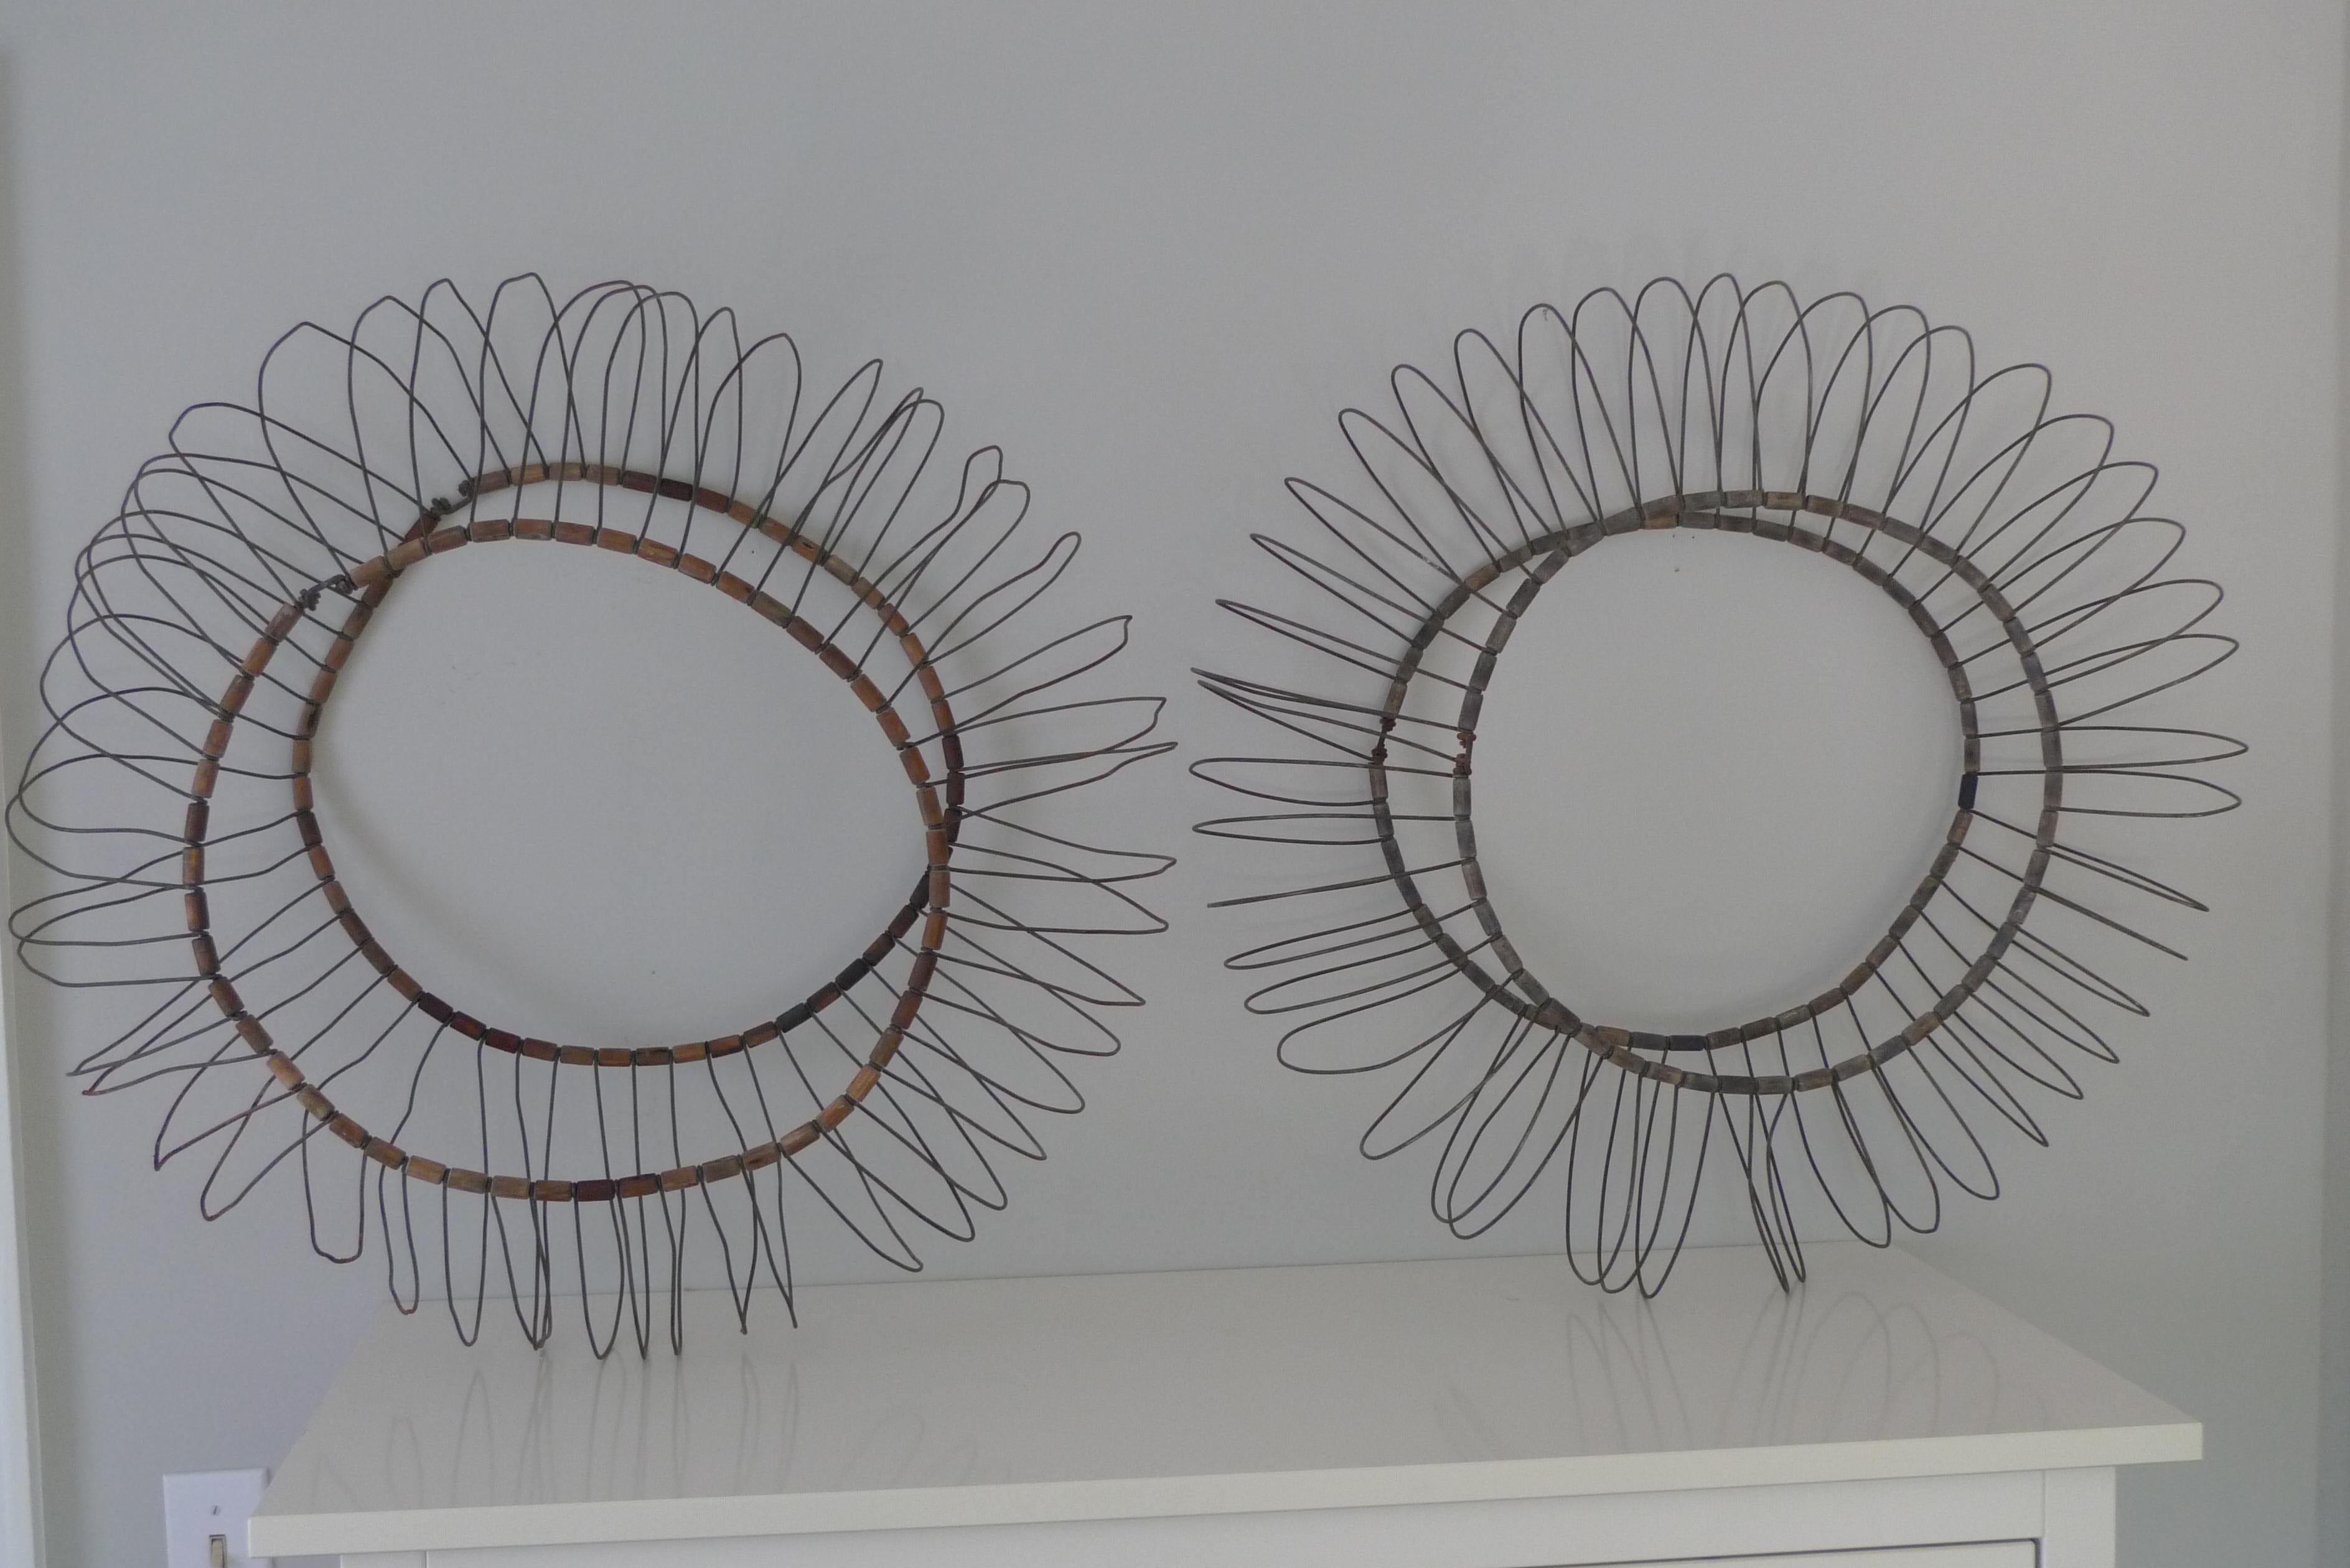 Sculpture for wall; midcentury bead wire tire structure, pair; like an eel trap For Sale 1